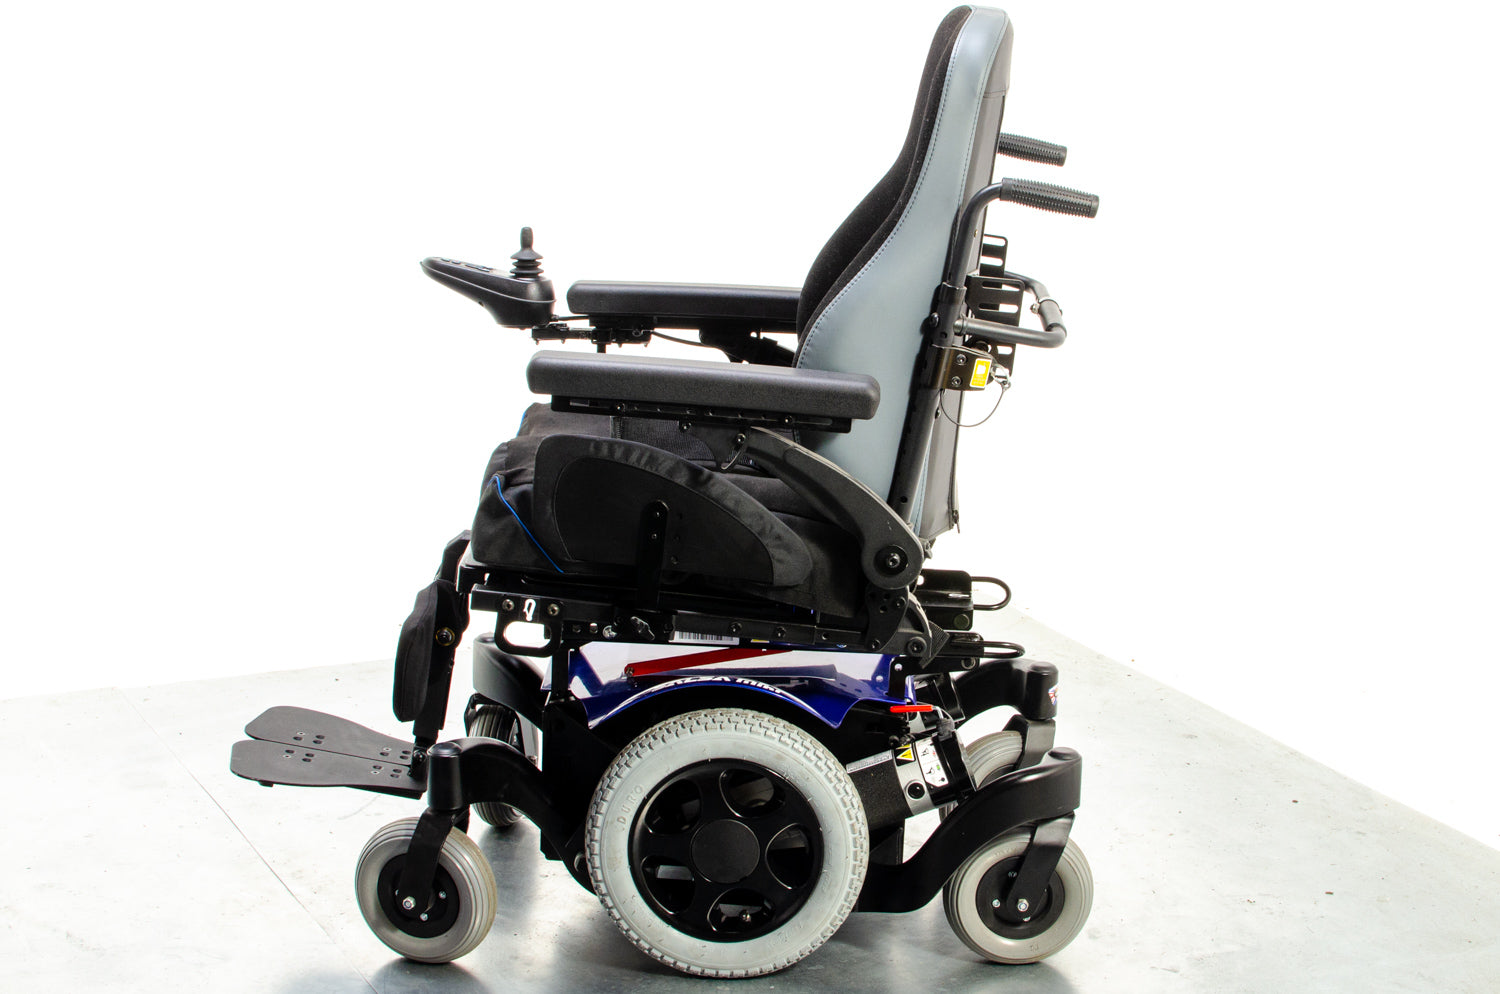 Quickie Salsa M2 6mph Used Electric Wheelchair Powerchair Sunrise Medical Outdoor MWD Blue